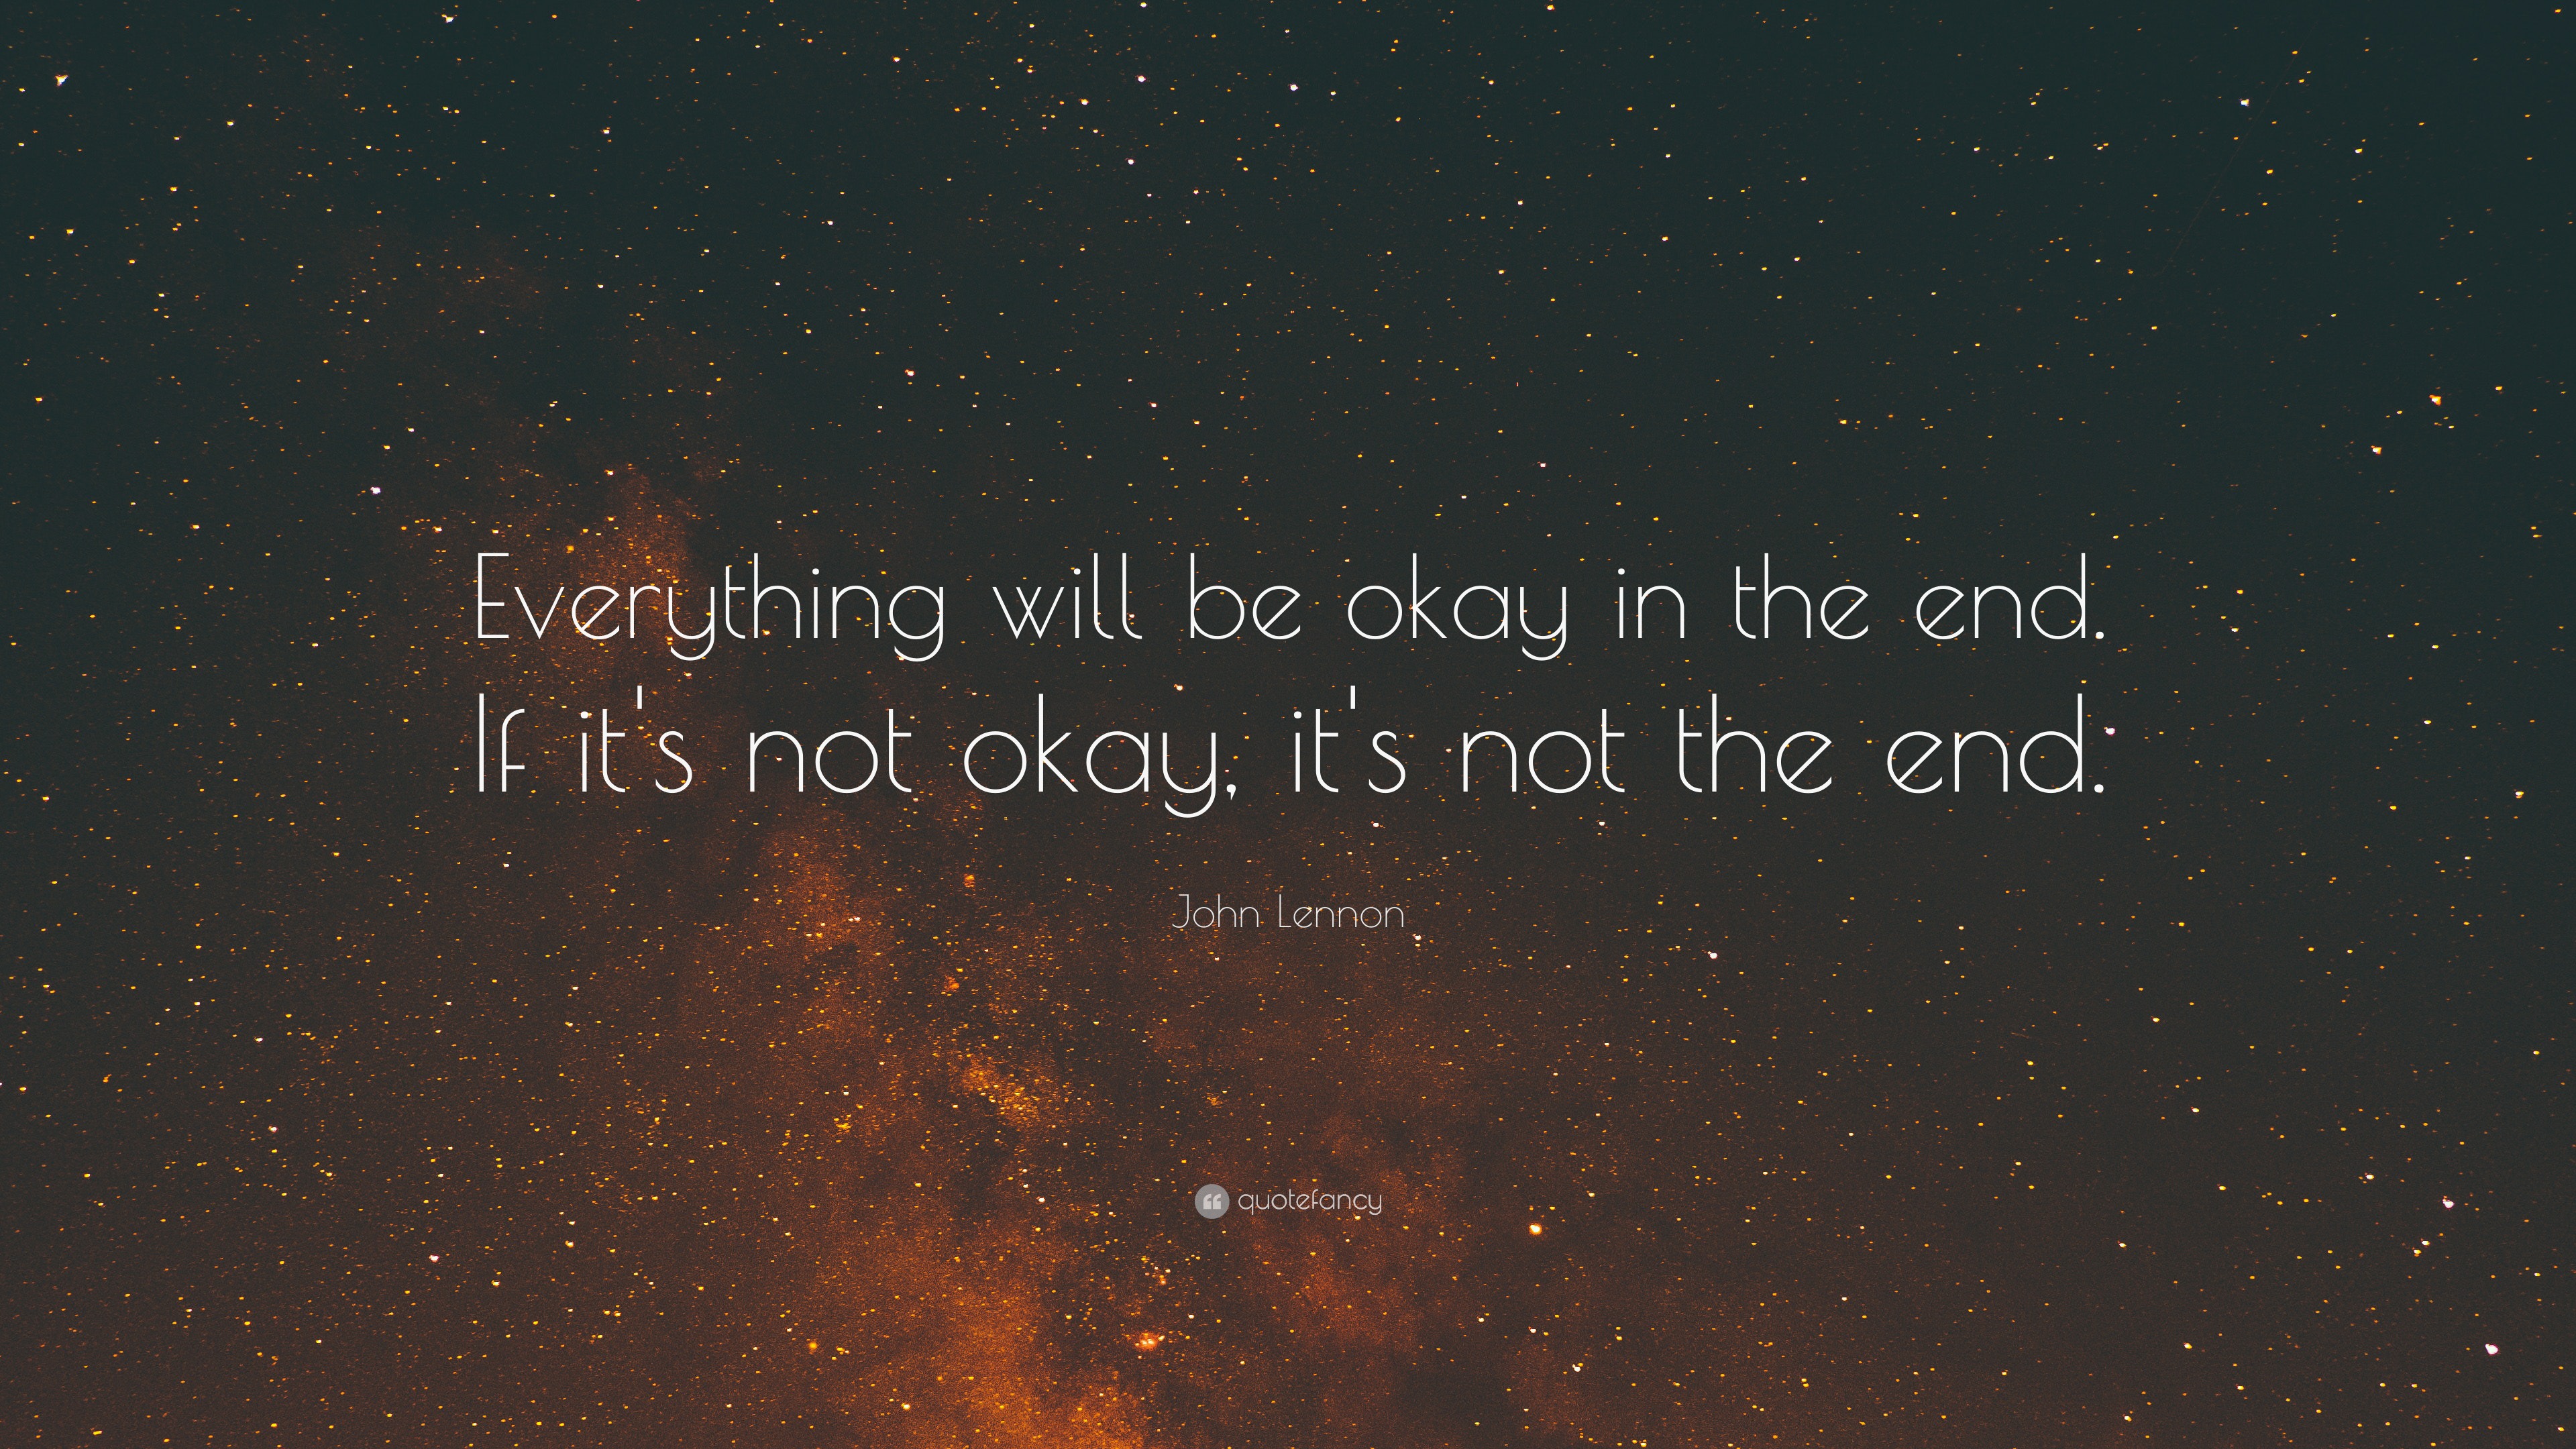 John Lennon Quote: “Everything will be okay in the end. If it's not